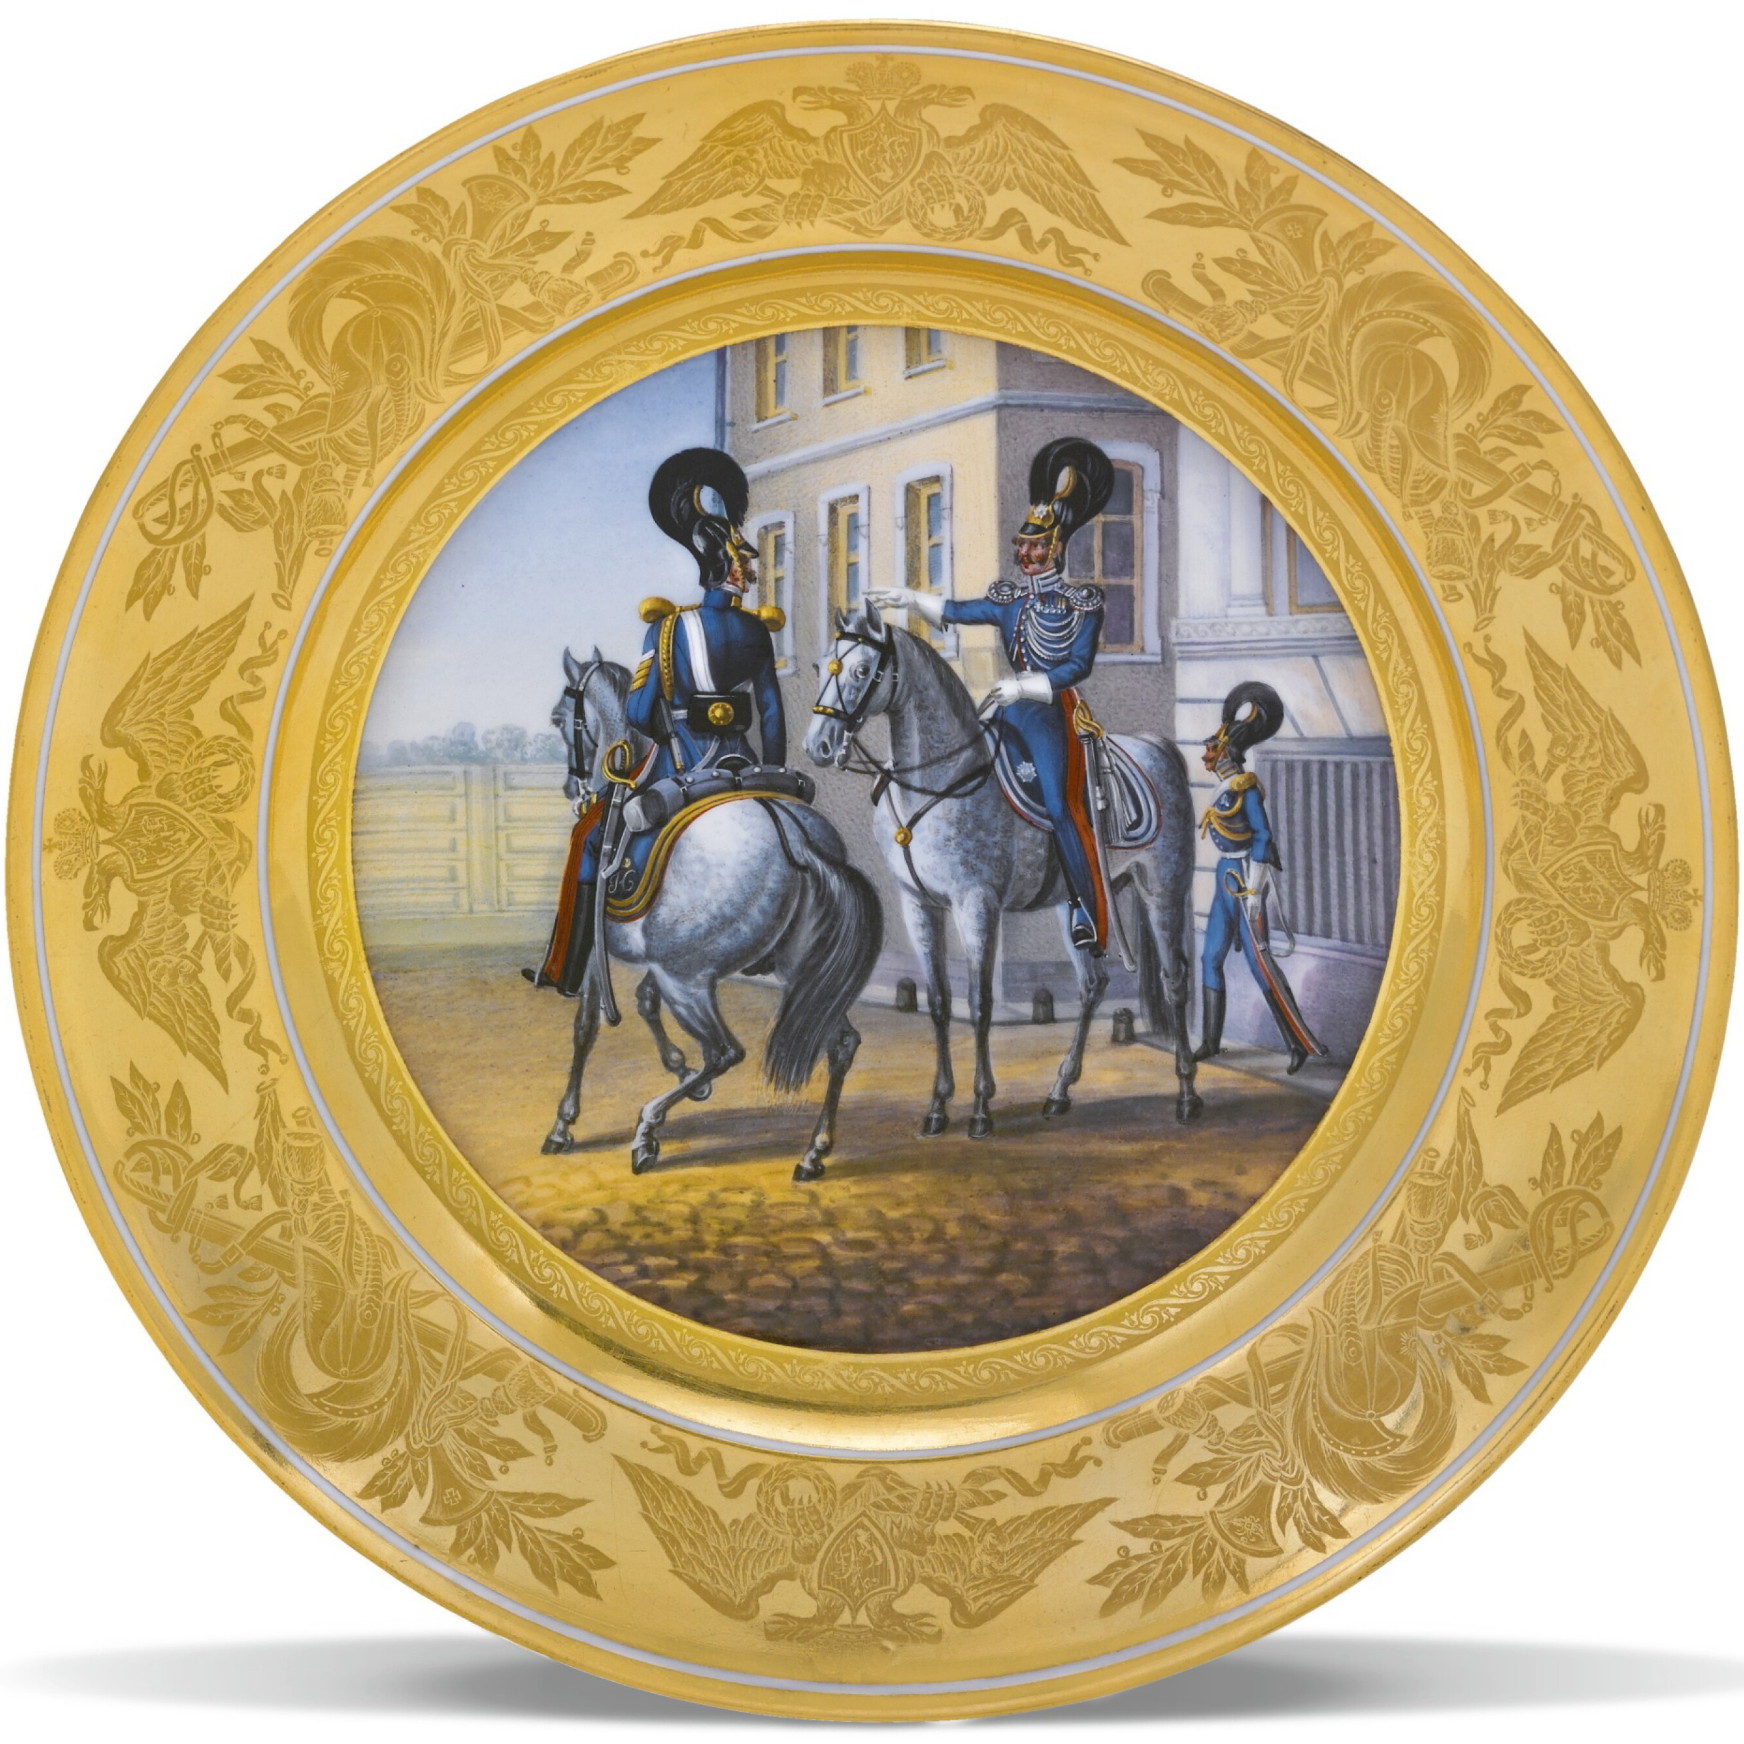 Russian Imperial Porcelain military plate depicting officers of Gendarme Squadron on horseback